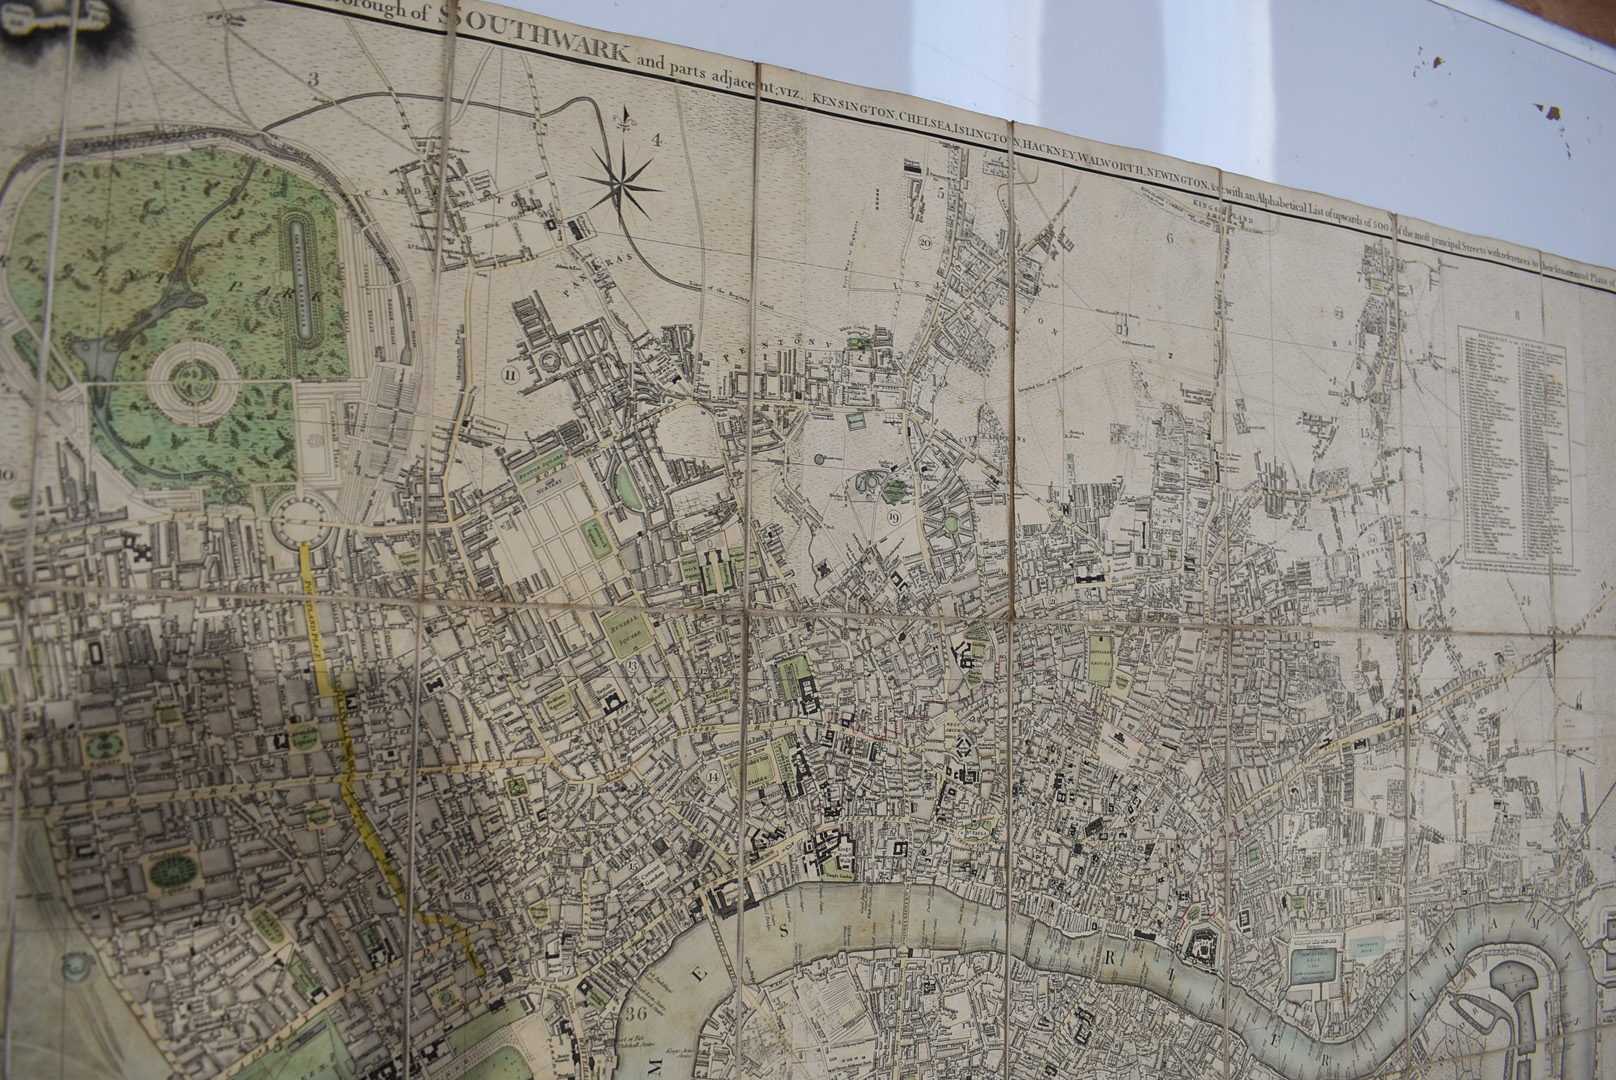 Cary's New and Accurate Plan of London and Westminster, the Borough of Southwick and parts Adjacent, - Image 5 of 8